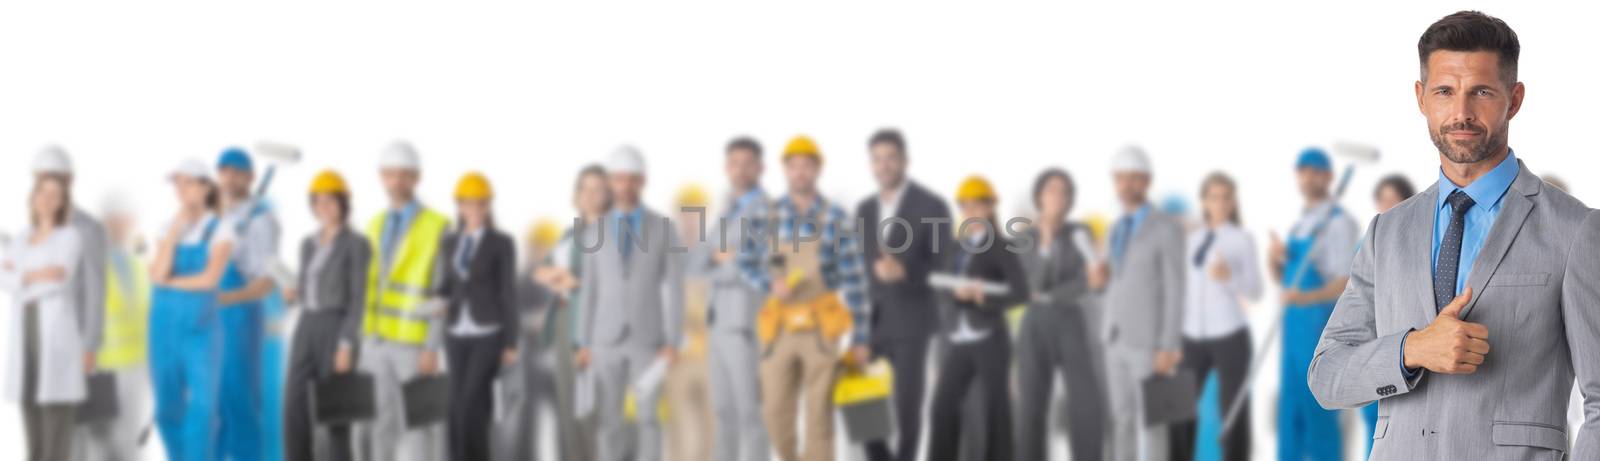 Businessman with thumb up in front of crowd of different industries professions people cooperation job search staff management concept